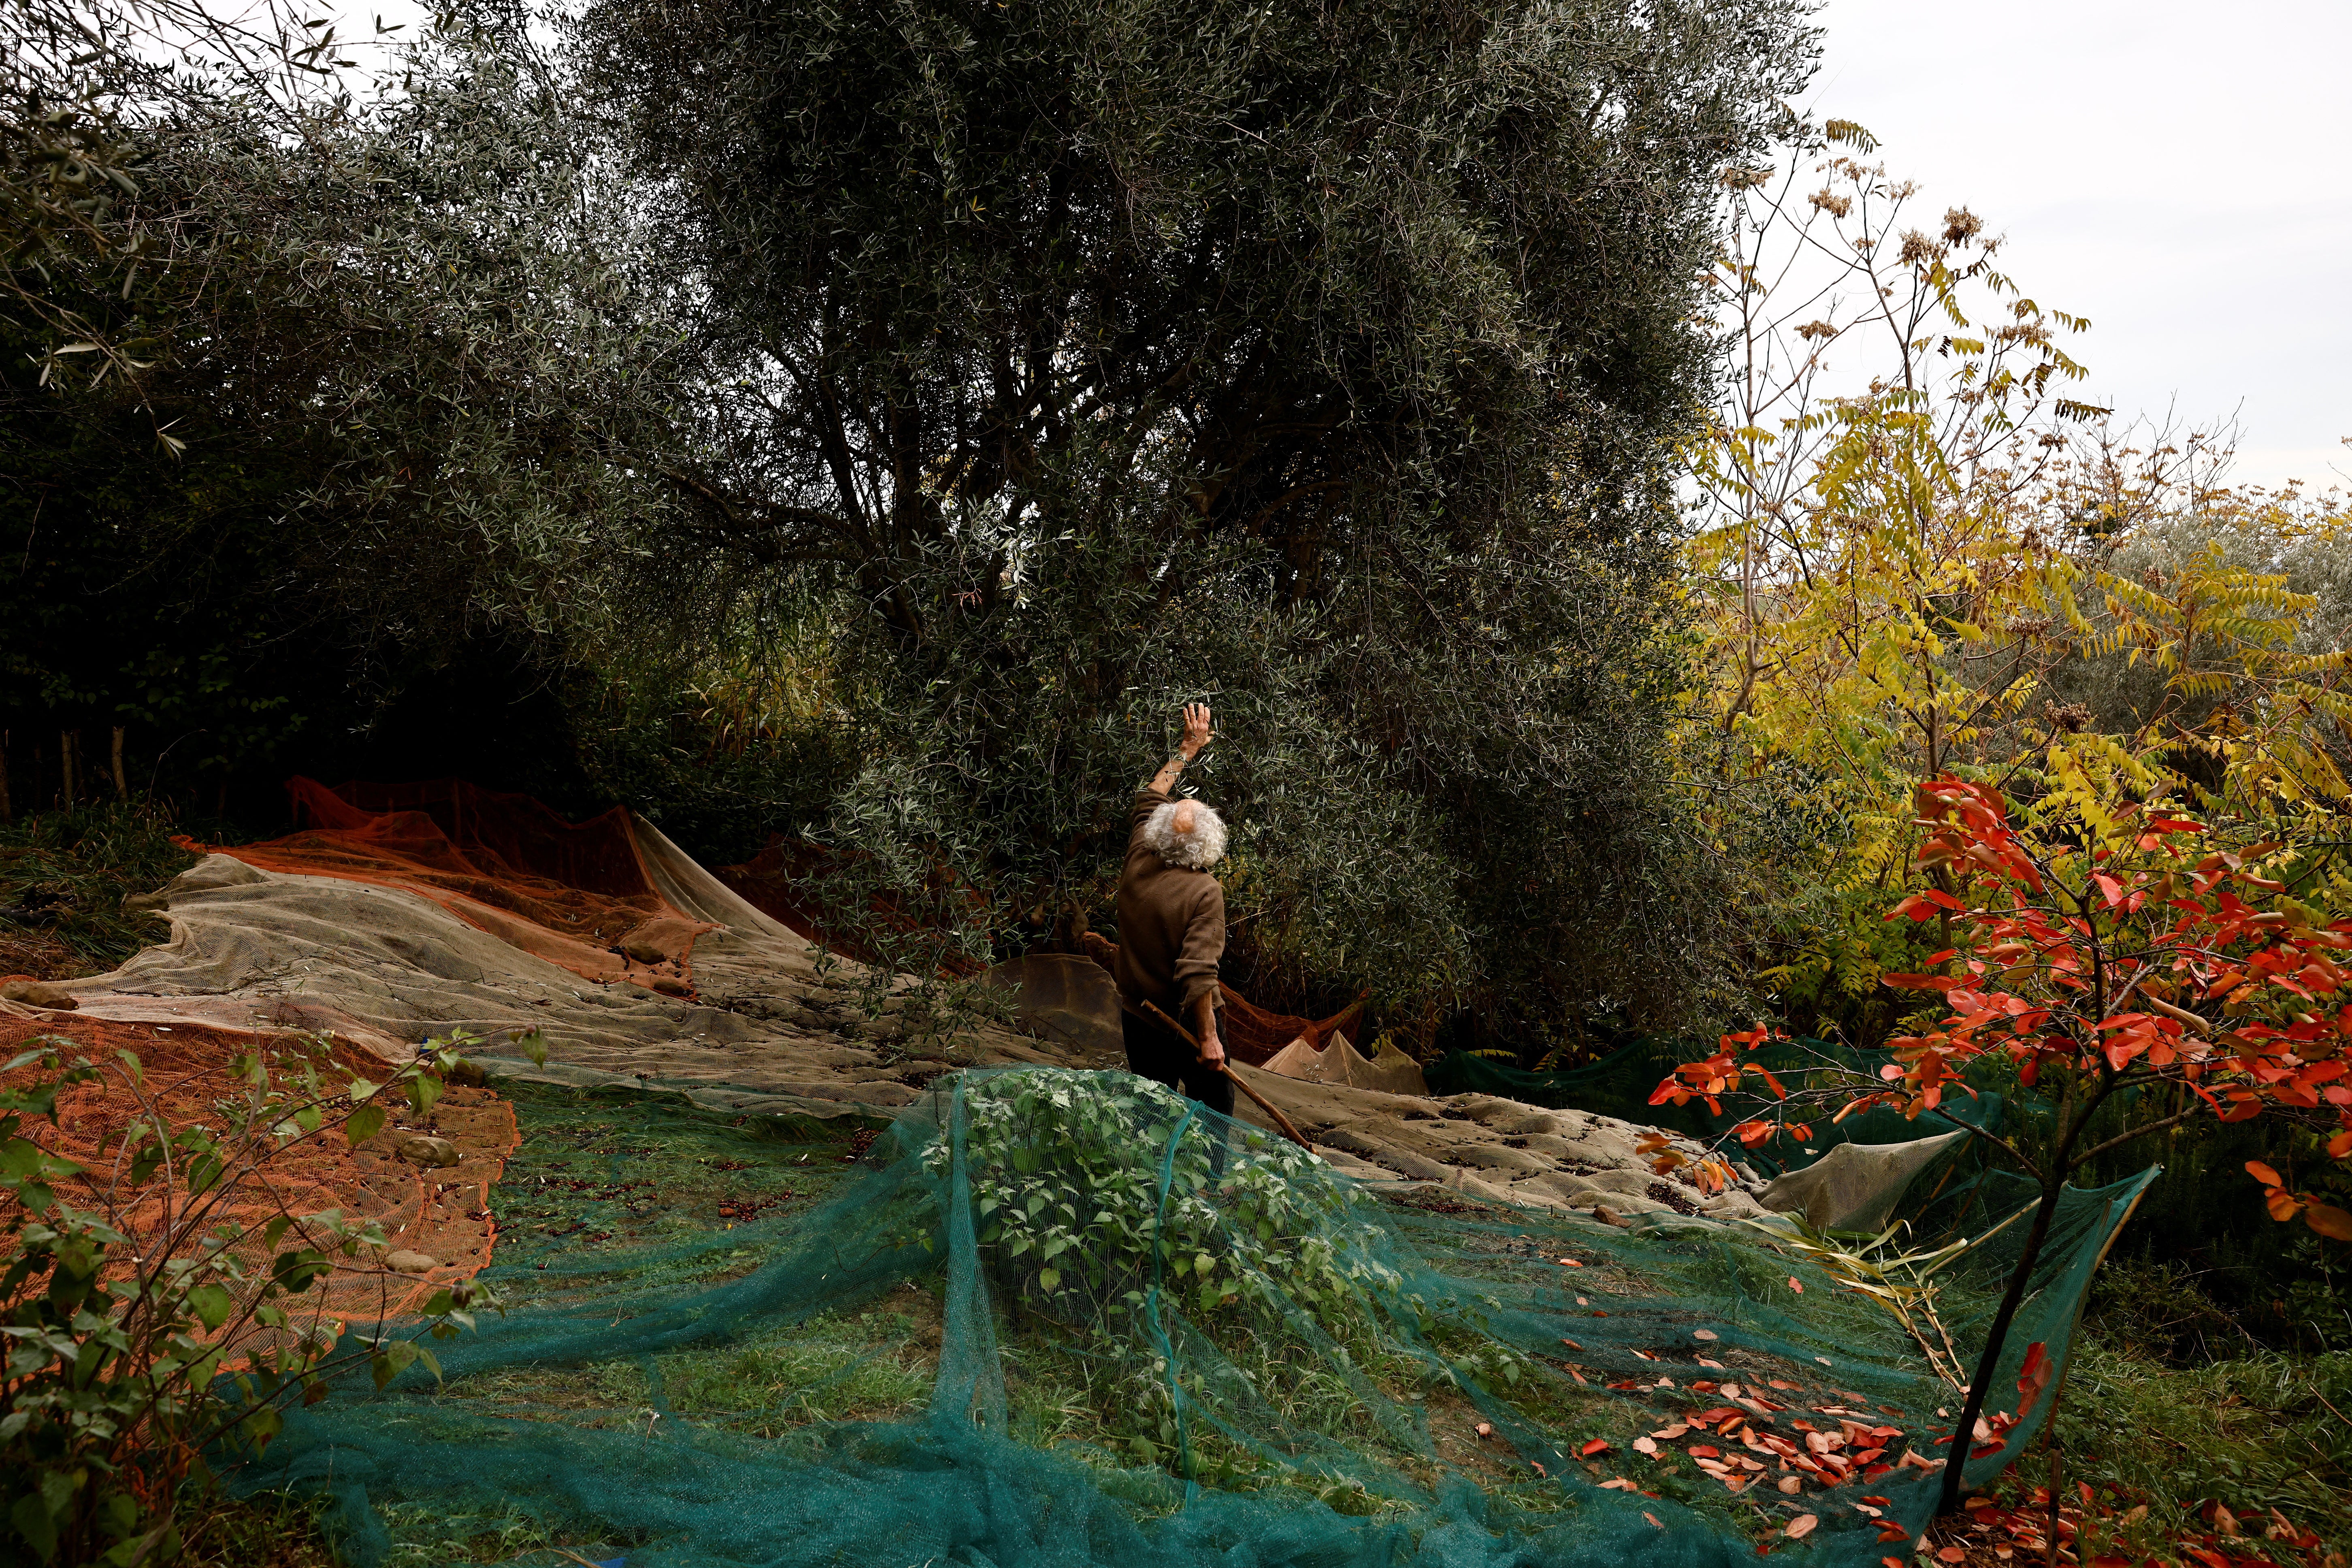 Harvesting olives from the trees